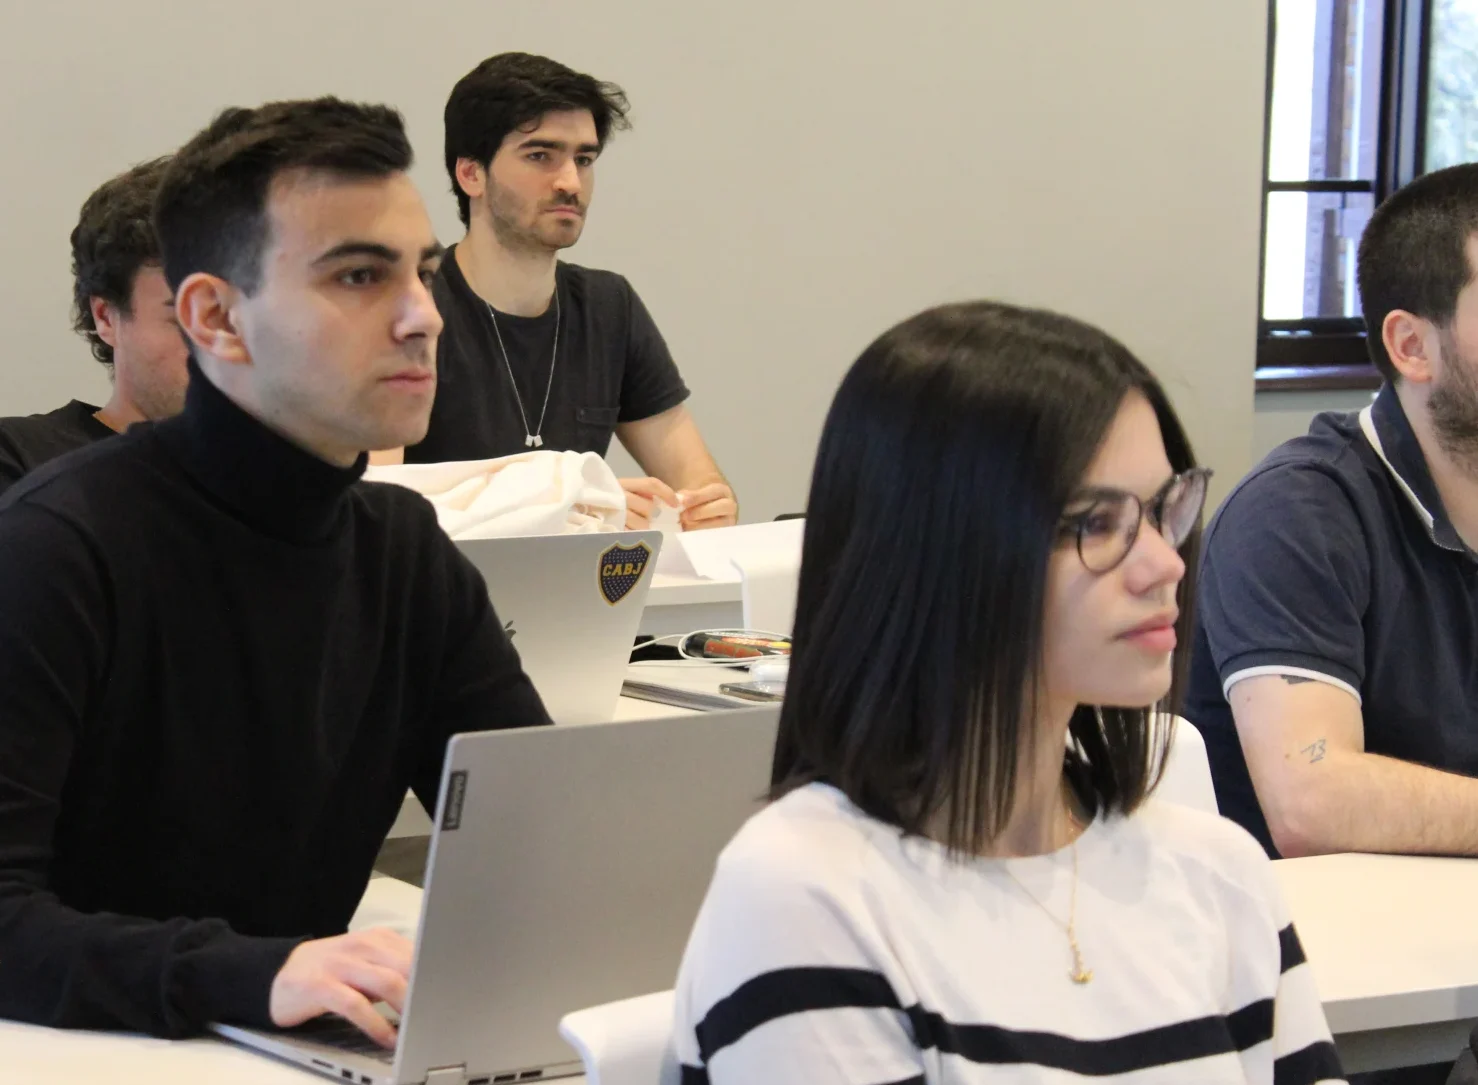 digital innovation programs for millennials businesses at Rome Business School